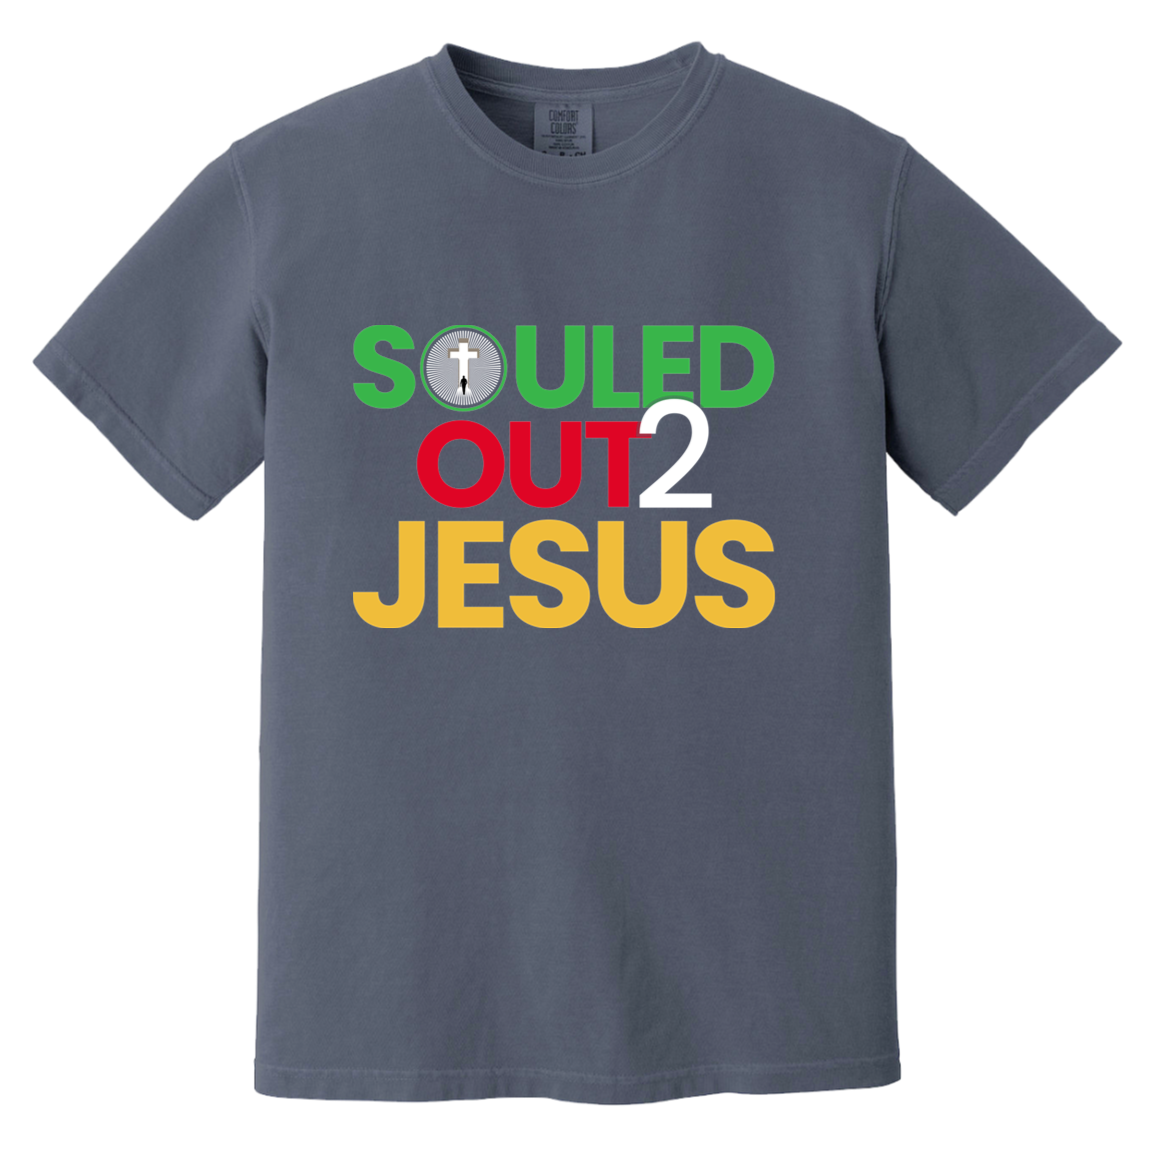 SOULED OUT 2 JESUS Garment-Dyed T-Shirt